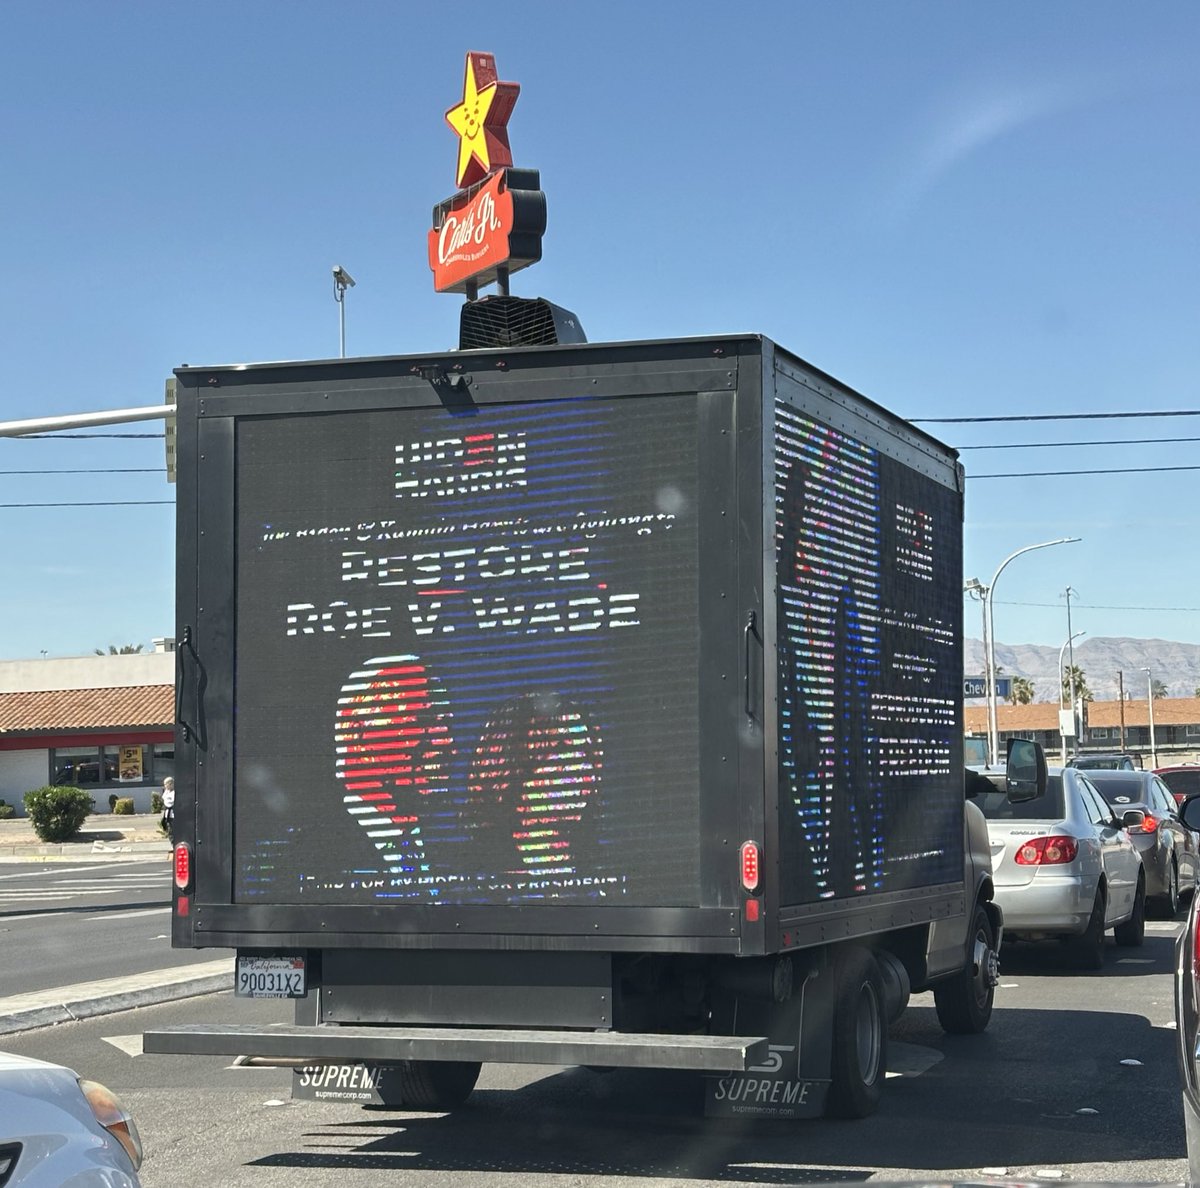 Spotted in East Las Vegas (heavy Dem area) yesterday. It says “Joe Biden & Kamala Harris are fighting to Restore Roe V. Wade” paid for by Biden/Harris campaign. (iPhone couldn’t get good pic) Dems are putting heavy resources into making this election about abortion.